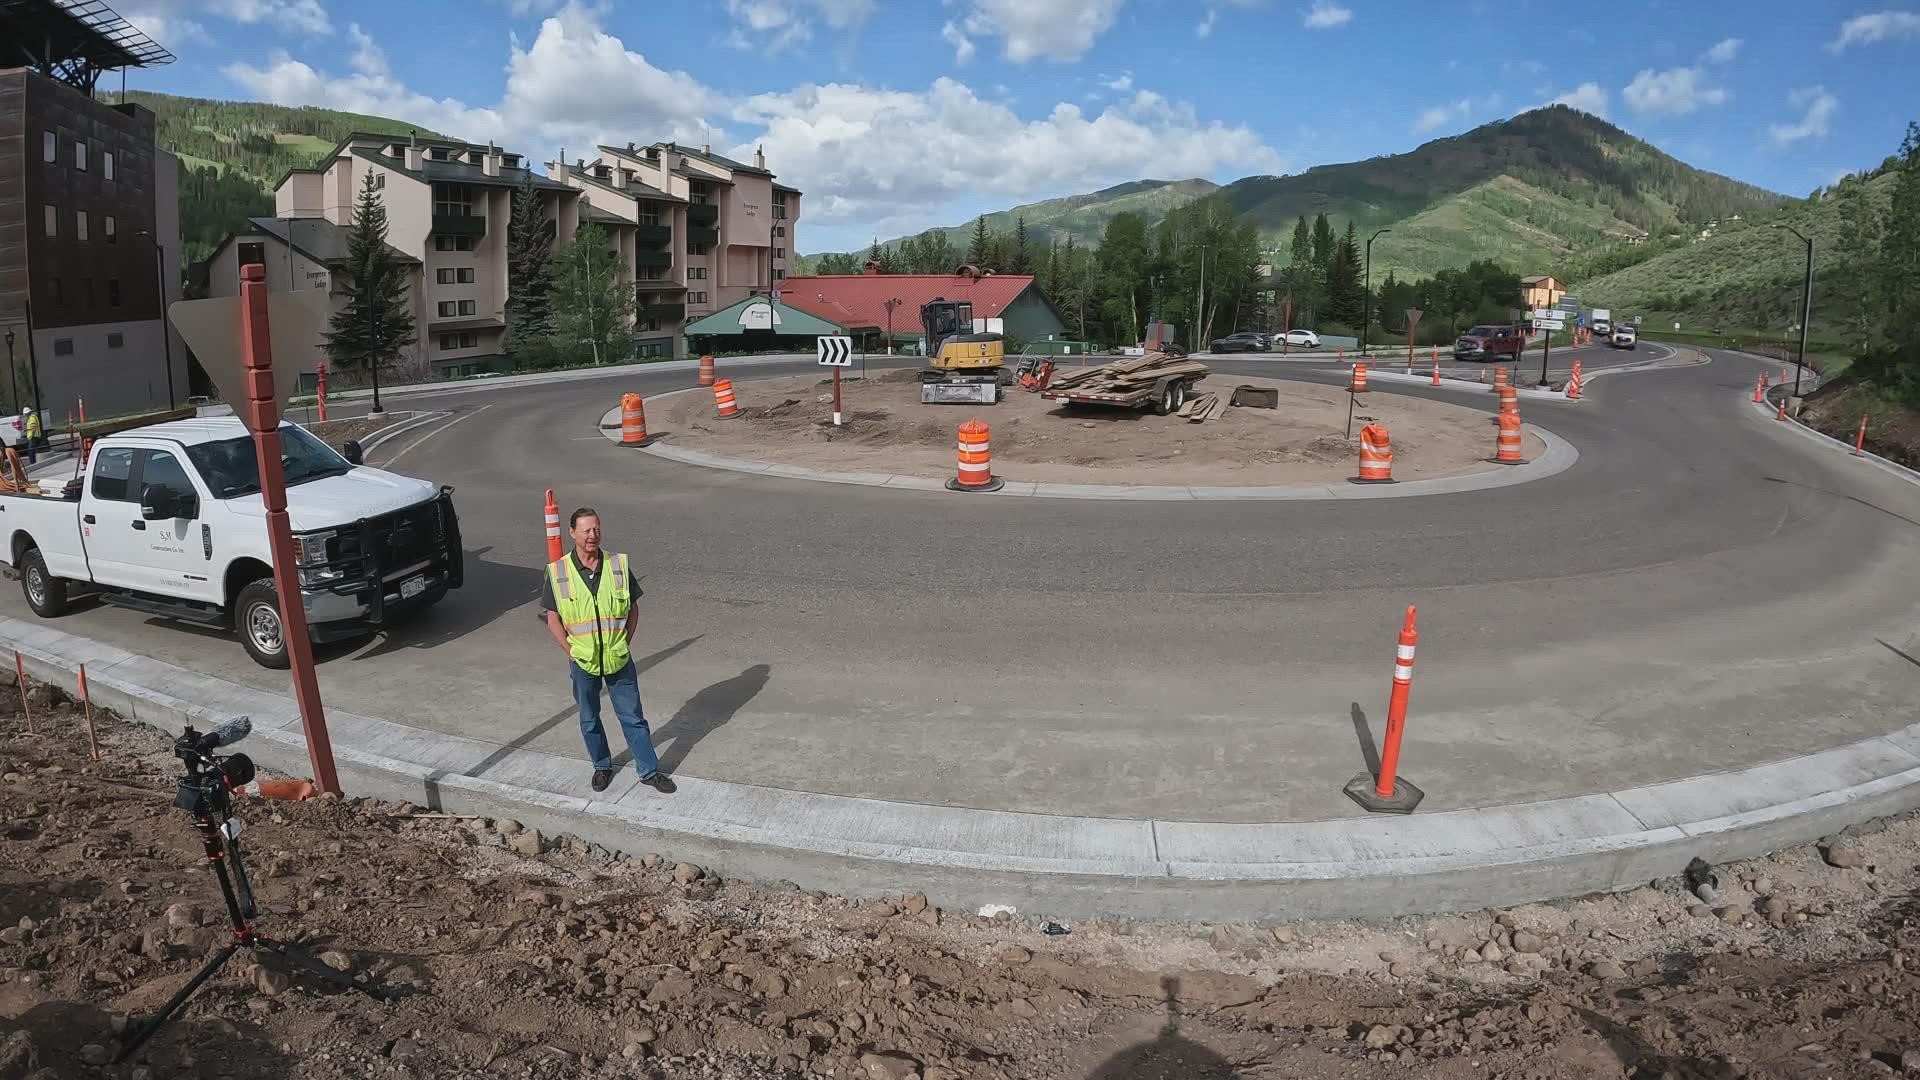 Vail says they built the first modern roundabout in North America at a busy interchange nearly 30 years ago, and now, they have 7 of them.